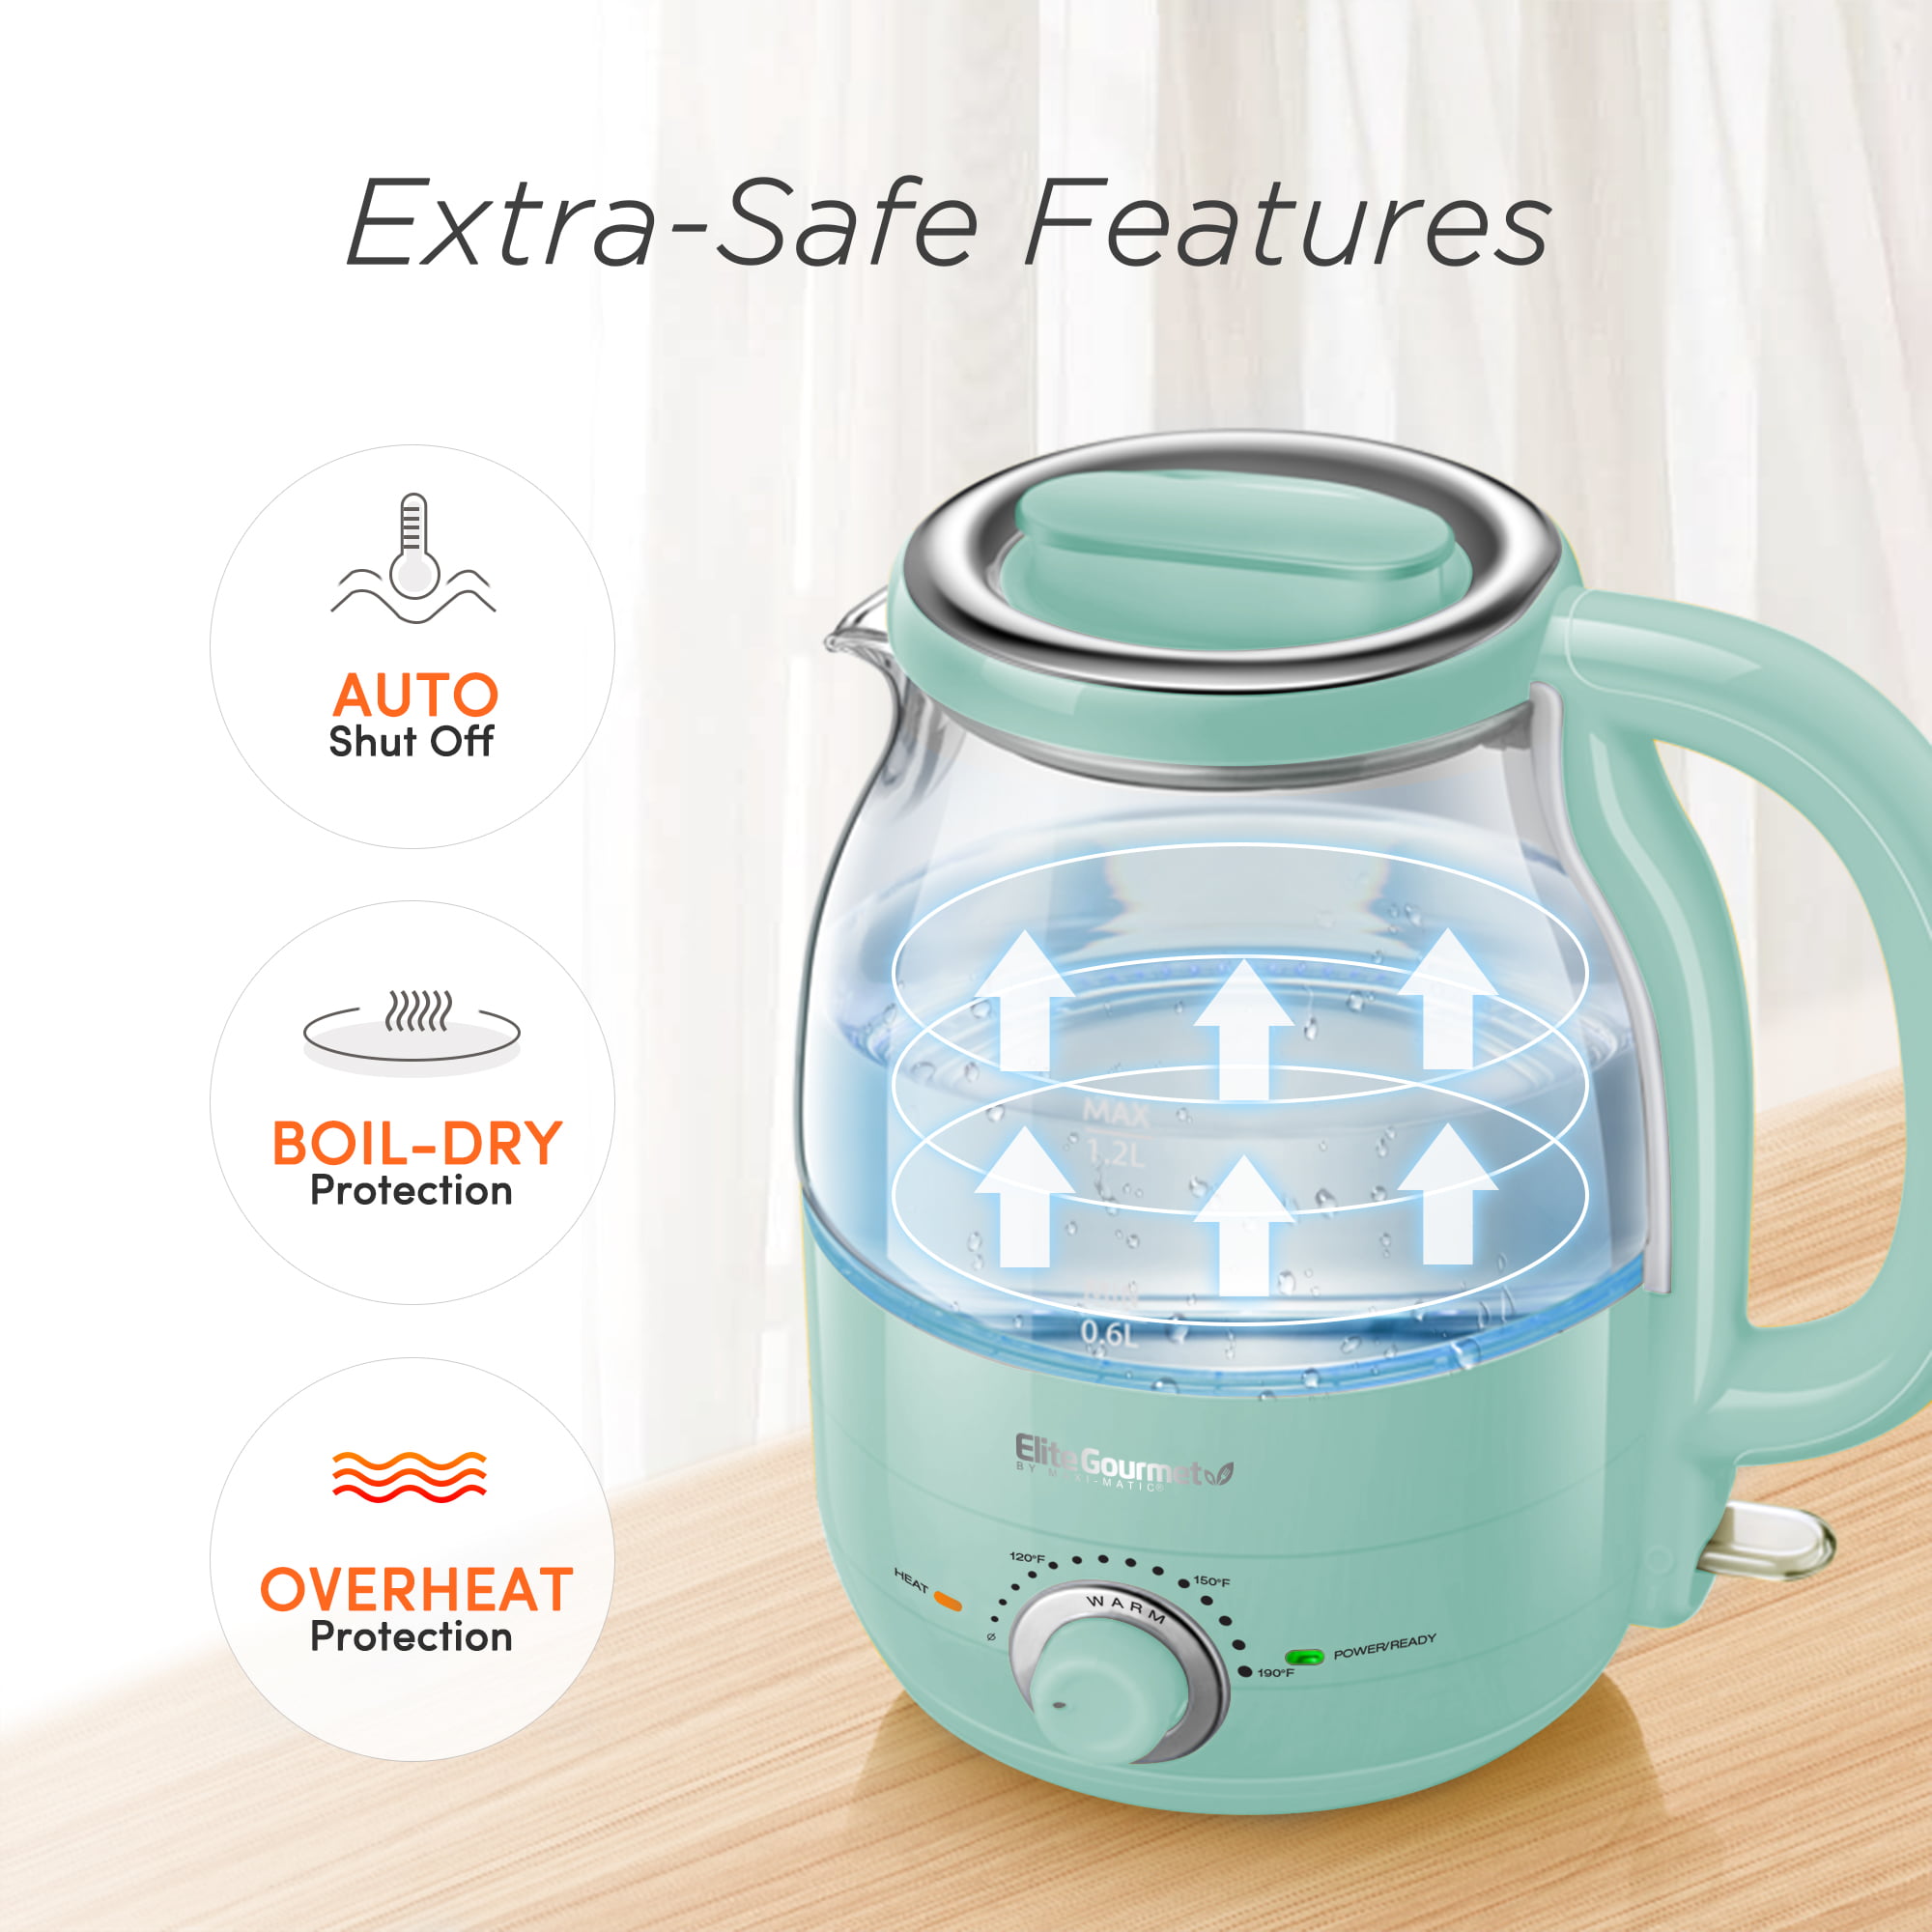 Shop Elite Gourmet on Instagram: Upgrade your hot beverage game with the Elite  Gourmet Electric Hot Water Kettle. Fast, efficient, and  oh-so-stylish—because your tea deserves the best. 🍵💫 #elitegourmet  #KitchenEssentials #TimeSaver #happykitchen